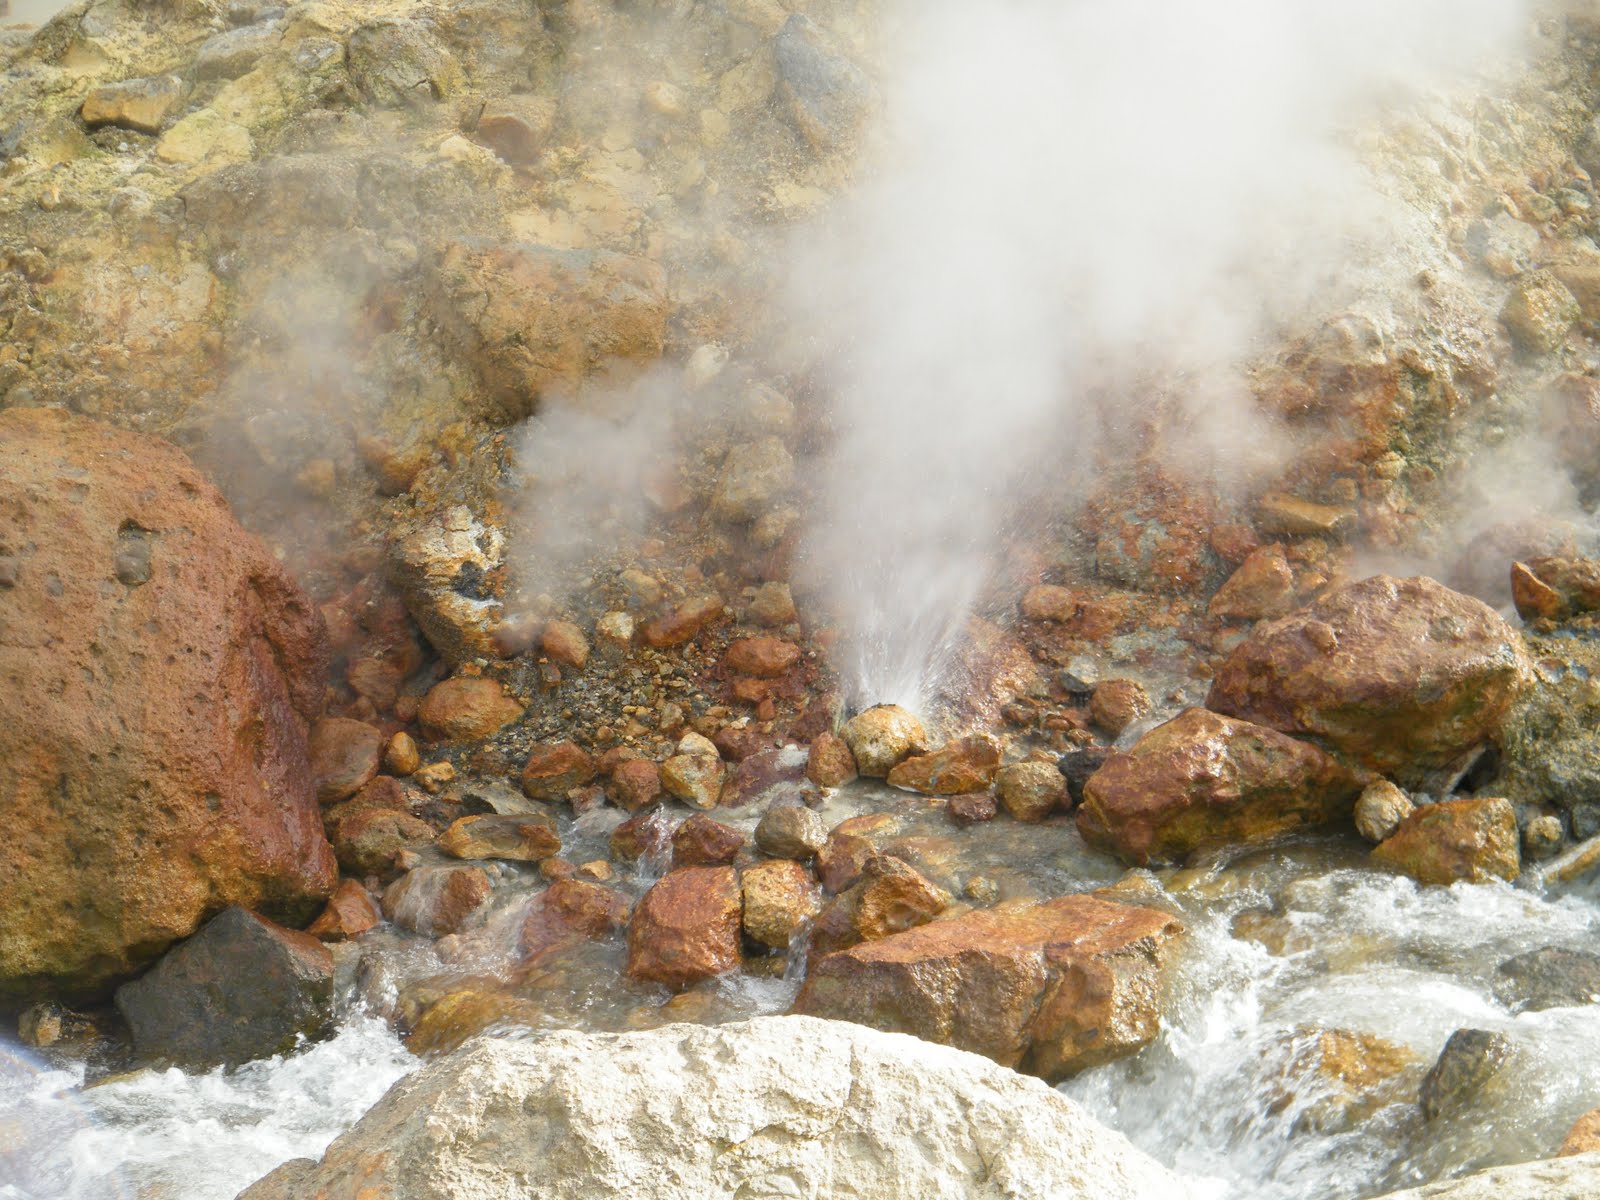 Russian hot springs point to rocky origins for life